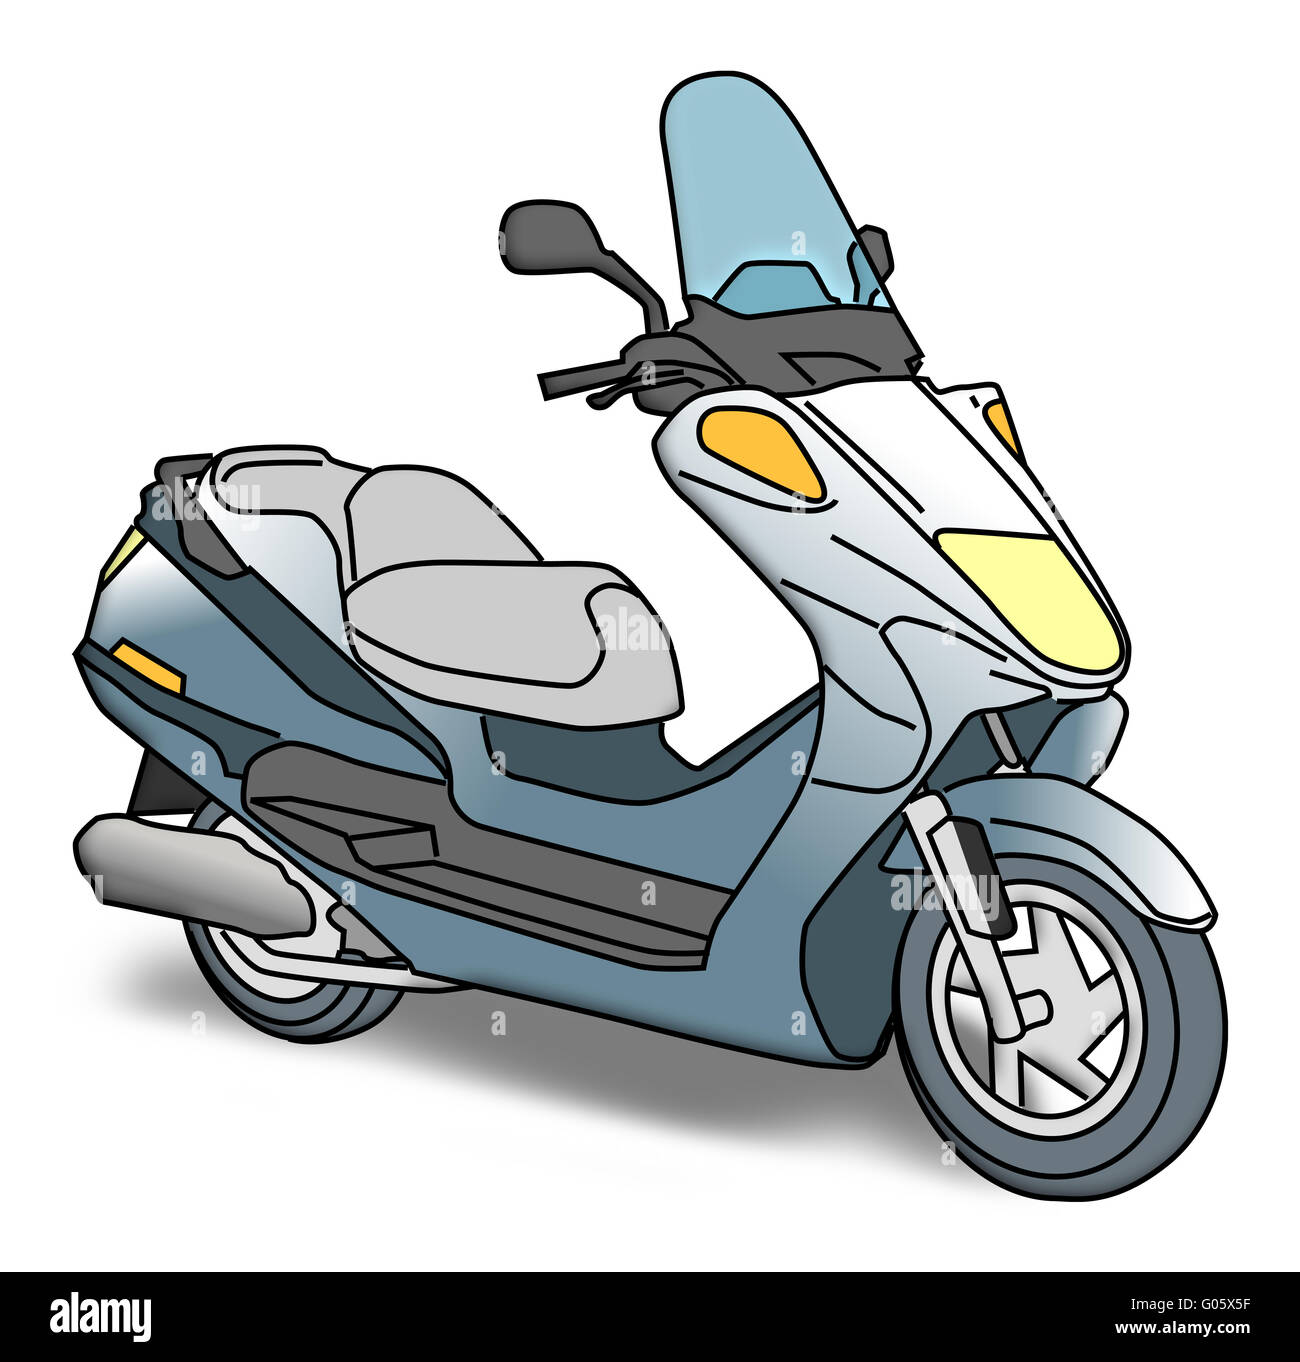 motor scooter Stock Photo